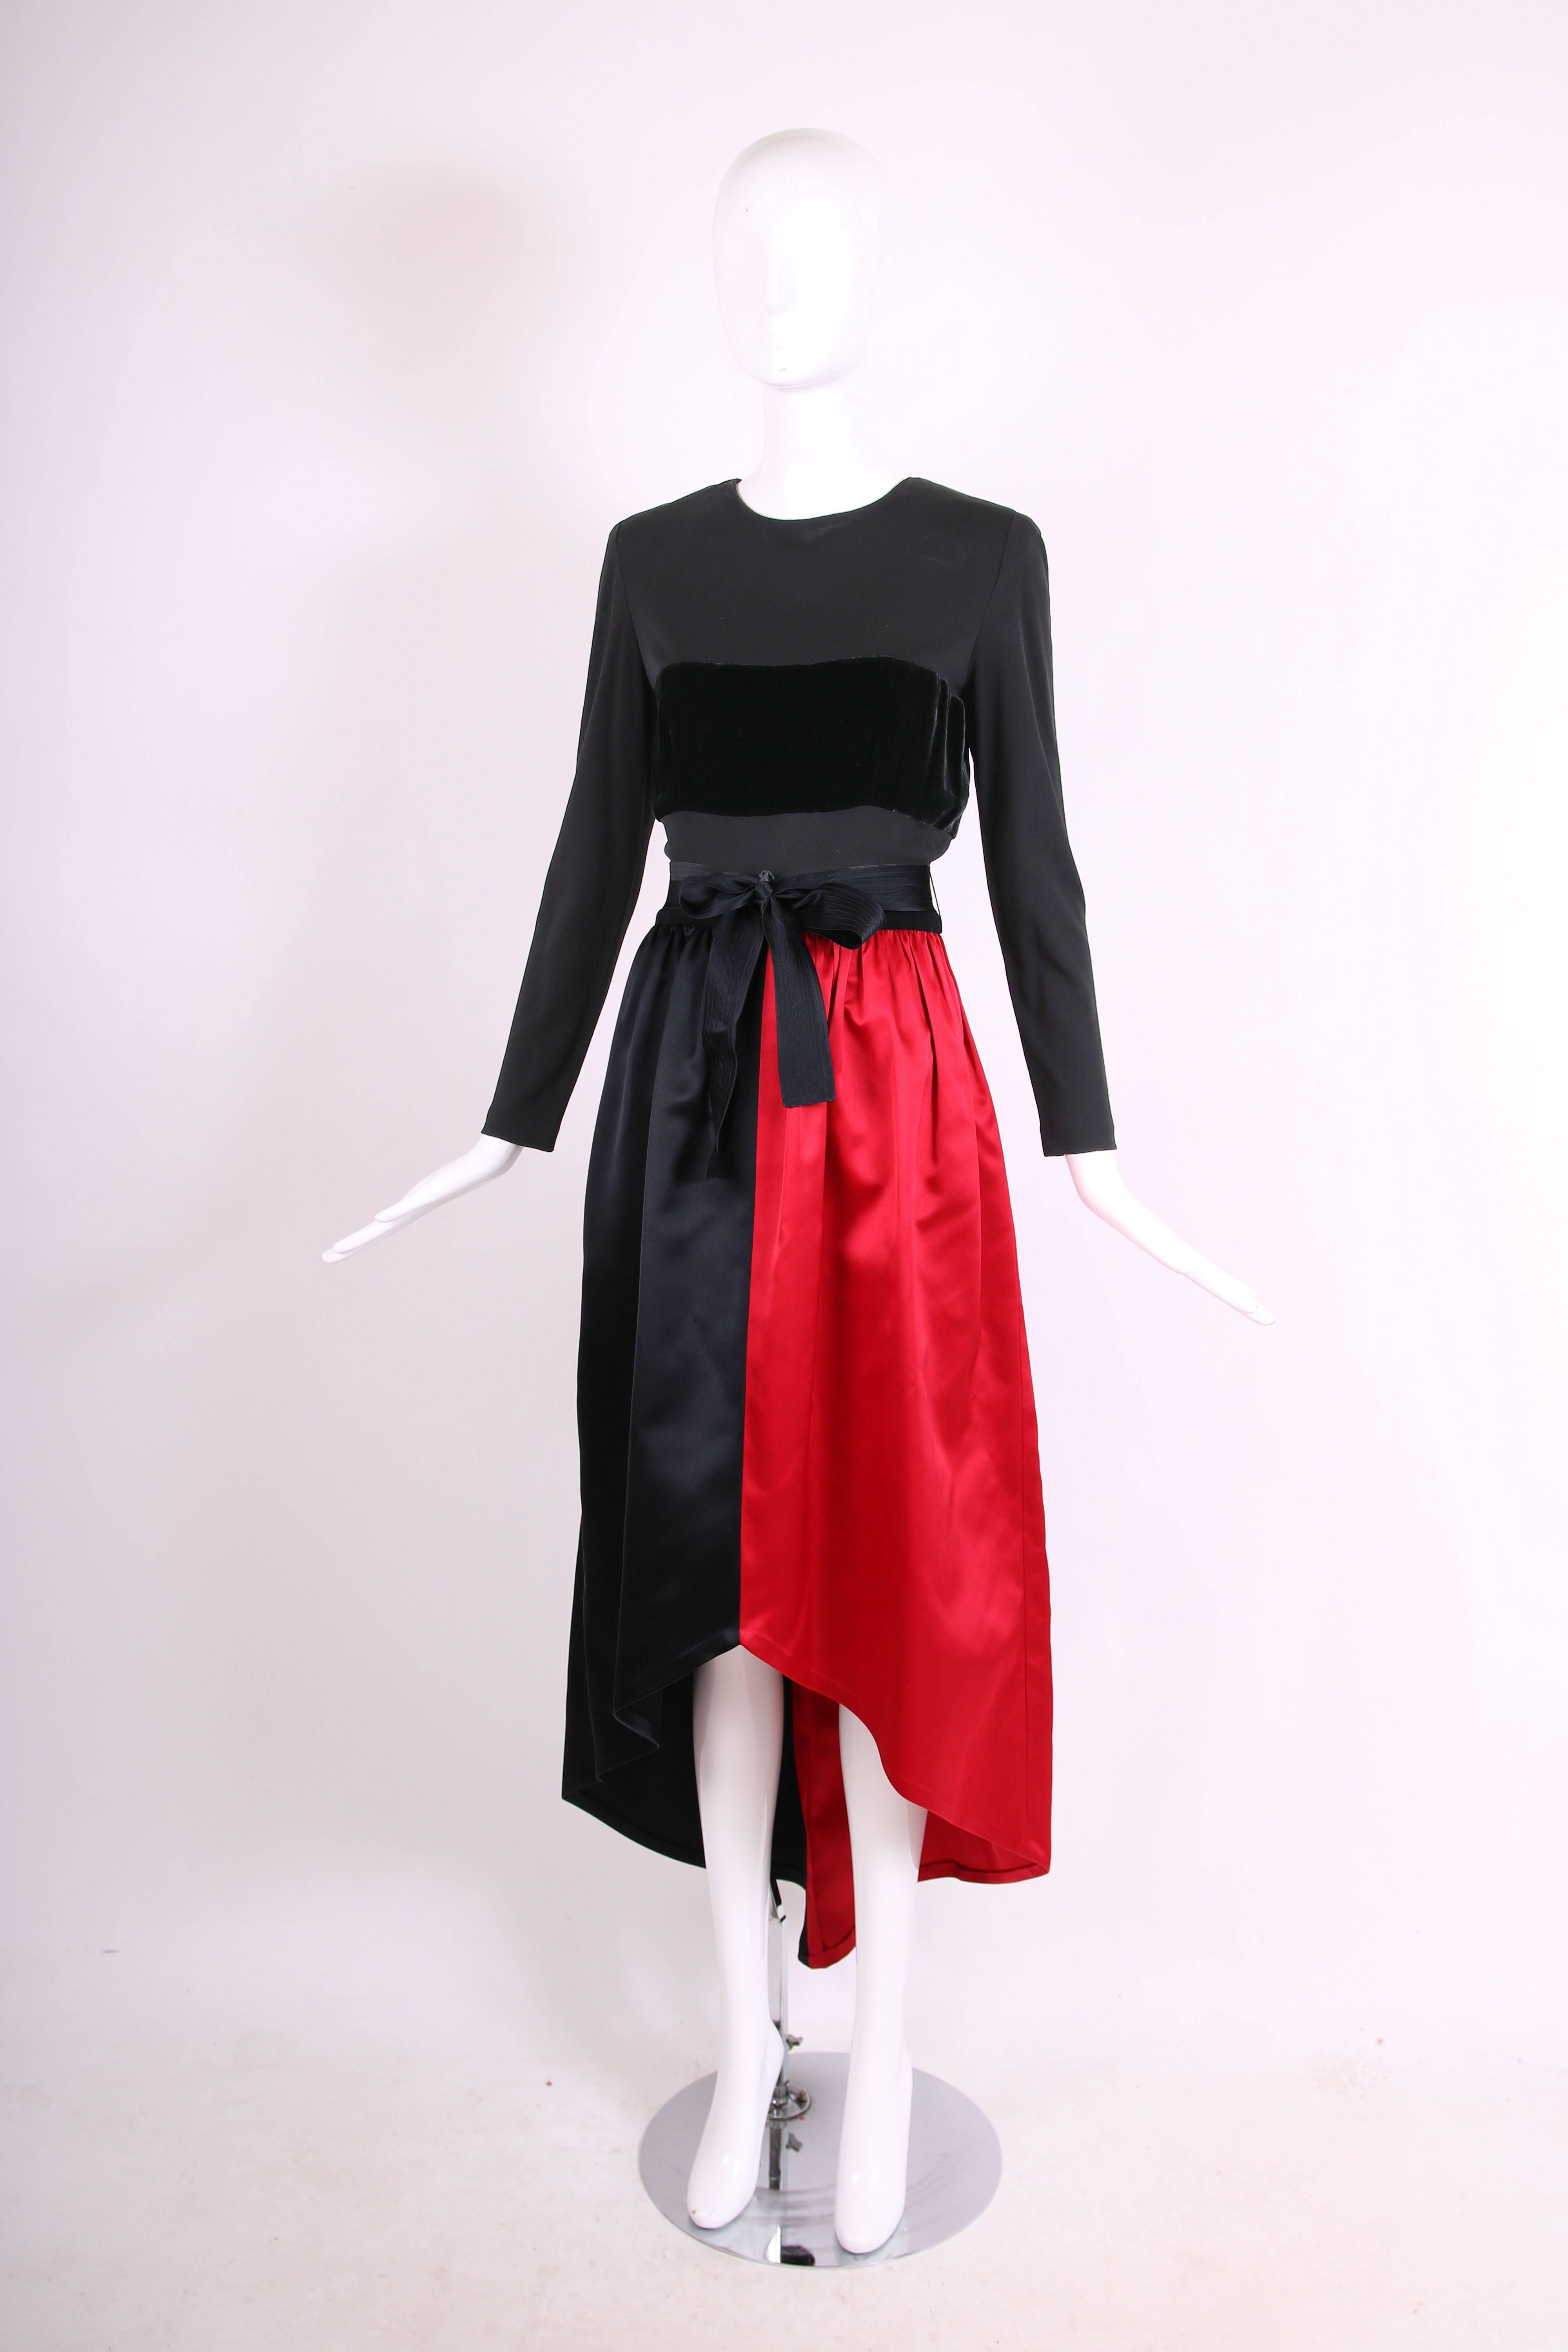 Bill Blass Red & Black Satin Evening Gown w/Illusion Top & Velvet Band In Excellent Condition For Sale In Studio City, CA